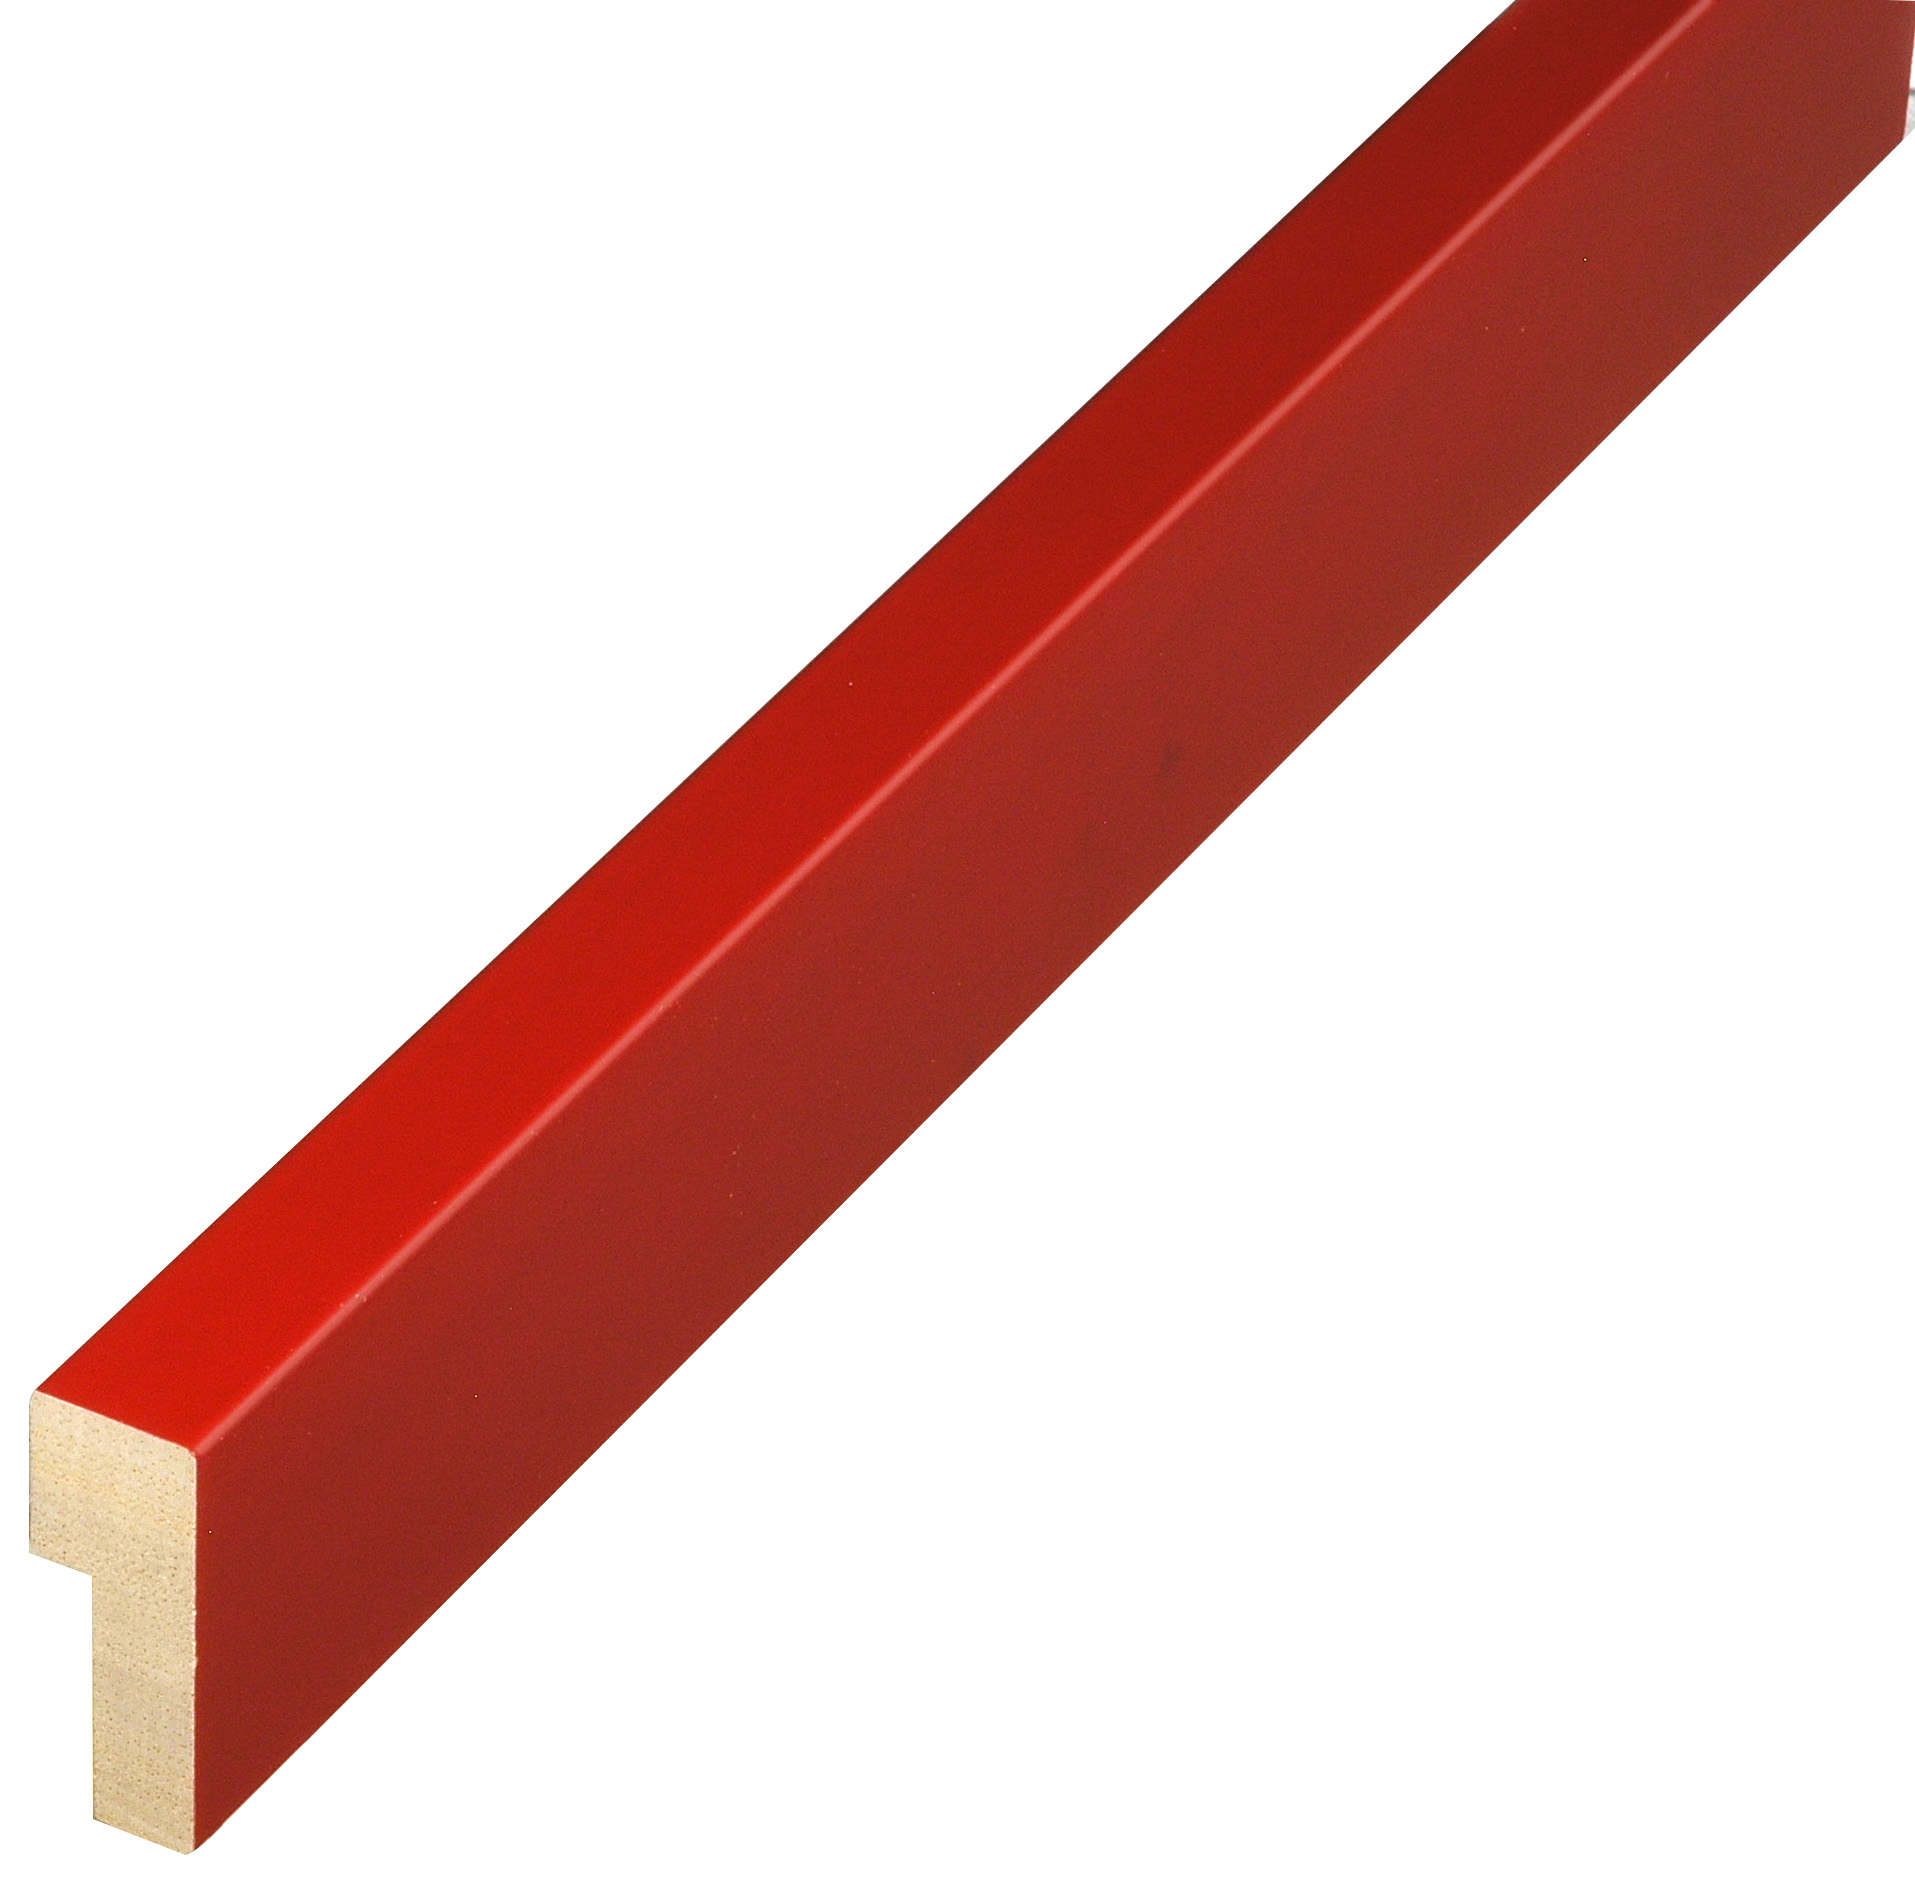 Moulding ayous - Widht 15 mm - Height 40 mm - Red - 726ROSSO